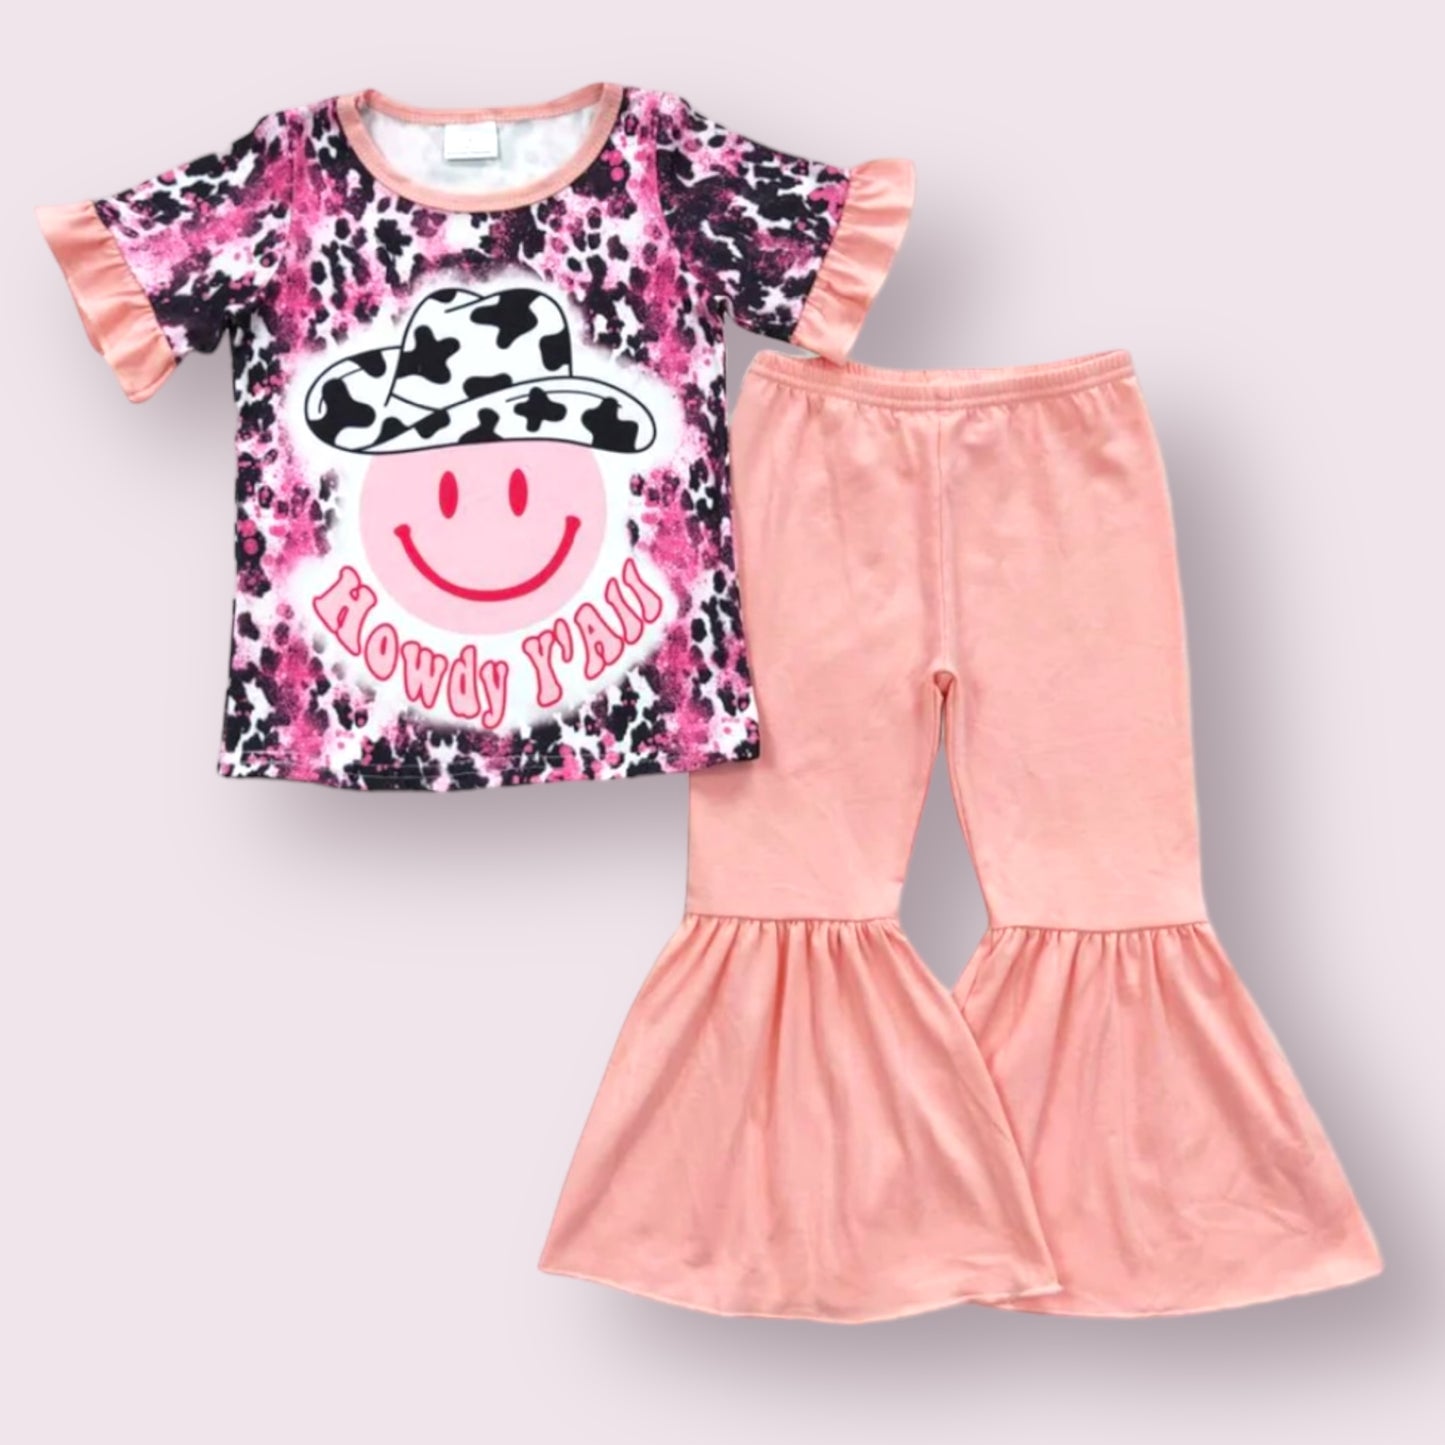 Howdy Smile Bell Pants Outfit